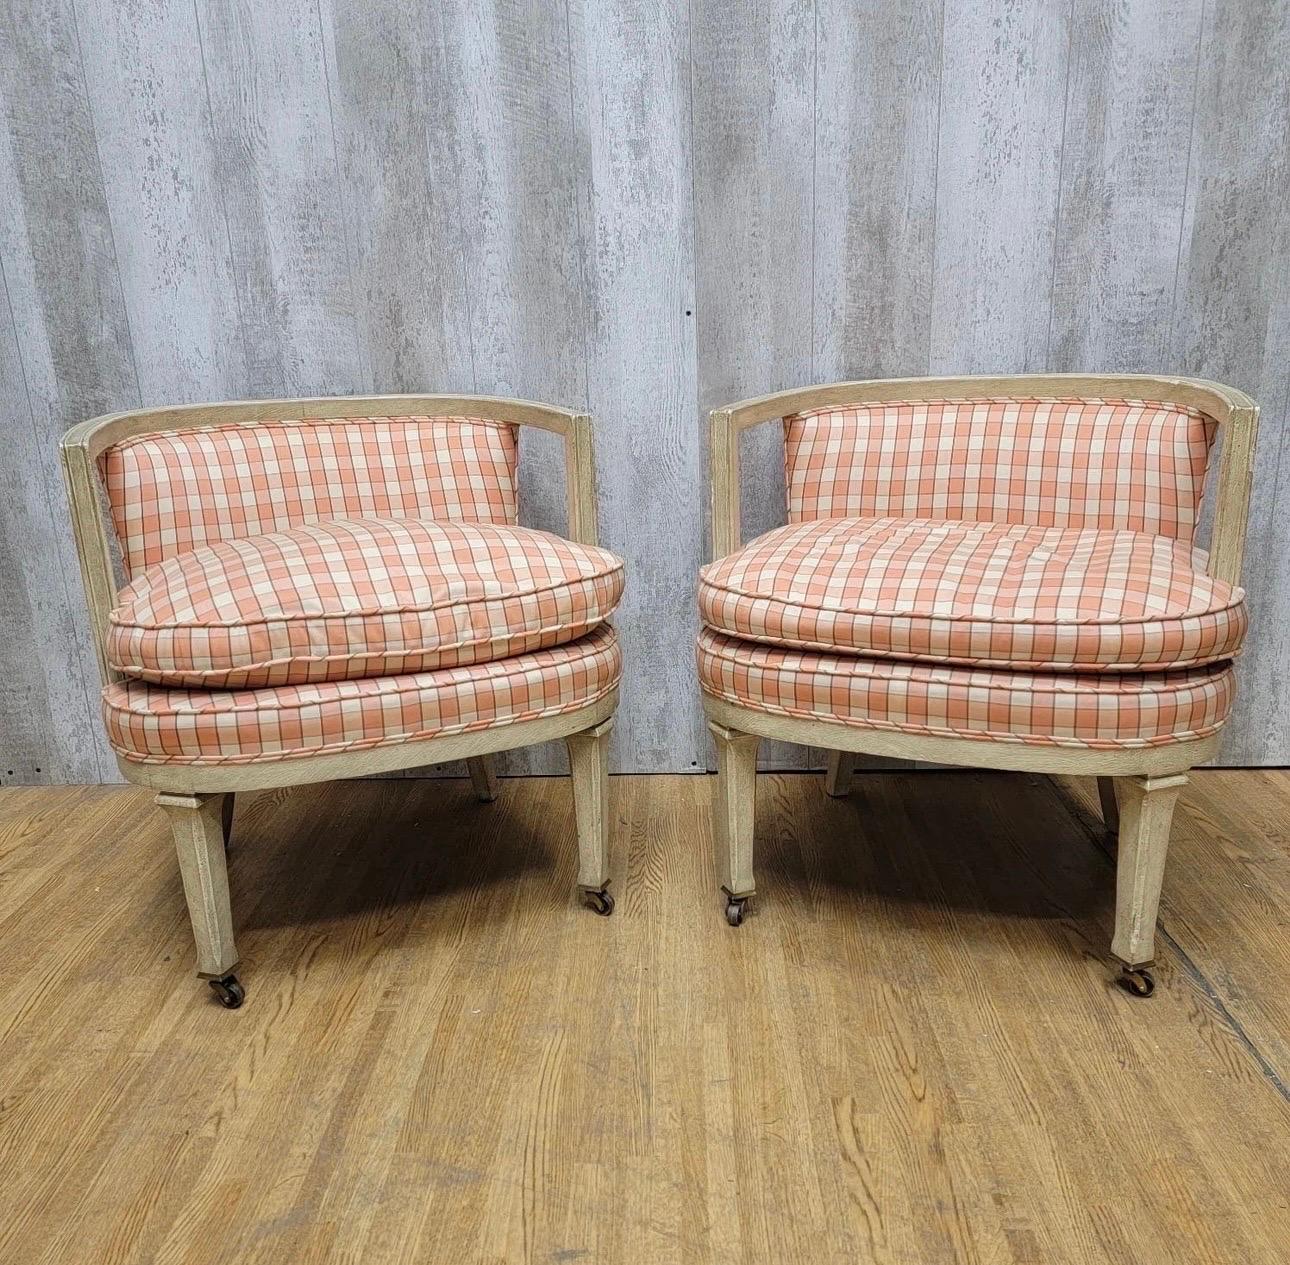 Mid Century Low Back Wood Frame Tub/Club Chairs With For Upholstery - Pair

Vintage mid century pair of club/tub chairs have wood frames with open arm detail and rounded, tub/barrell-form low backrests. 

These chairs are being being sold in its